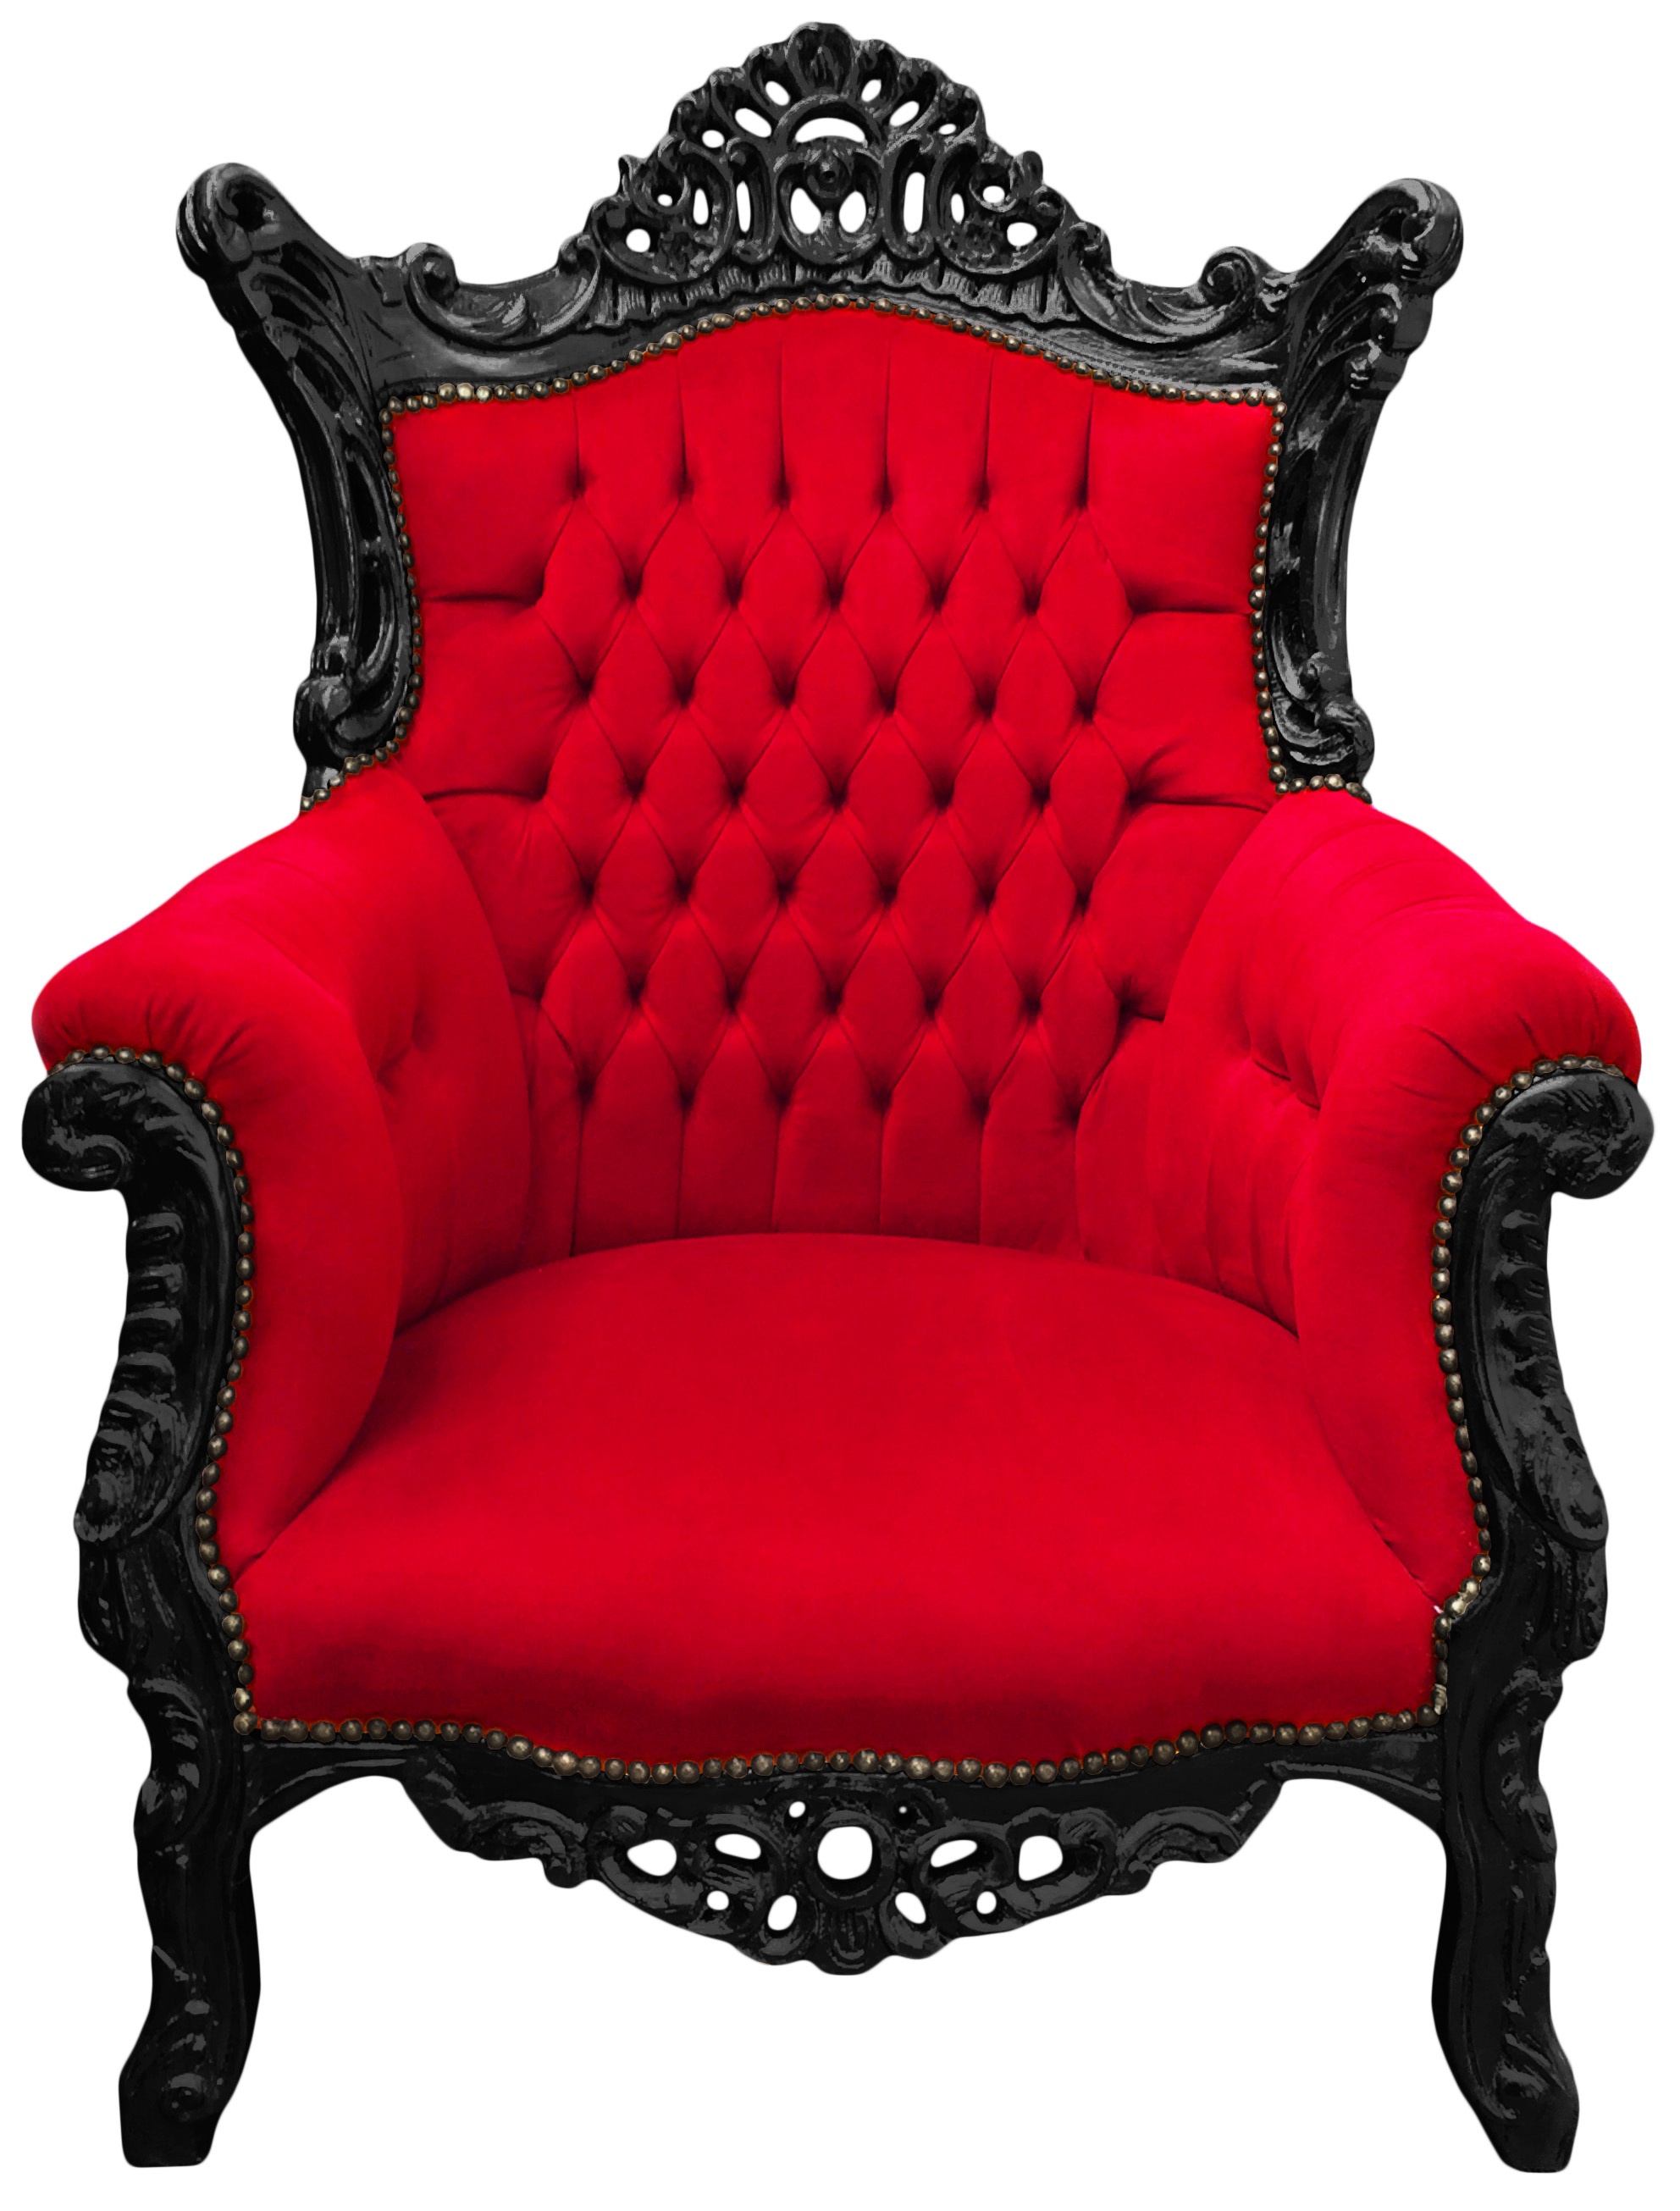 Perseus Konsulat Vie Grand Rococo Baroque armchair red velvet and glossy black